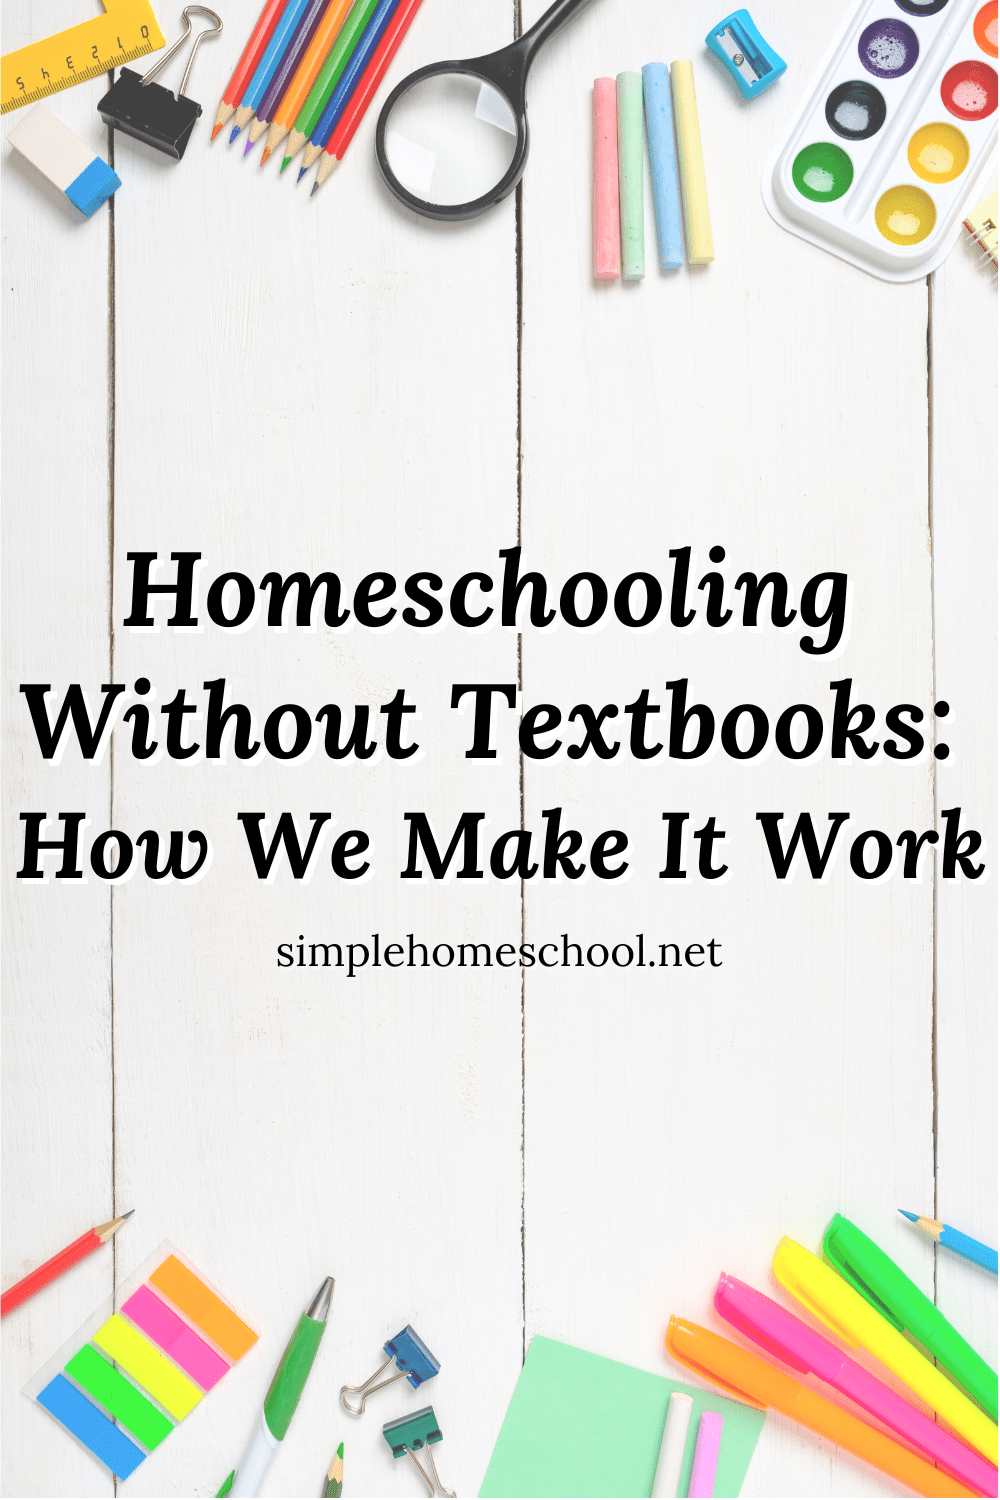 Homeschooling Without Textbooks